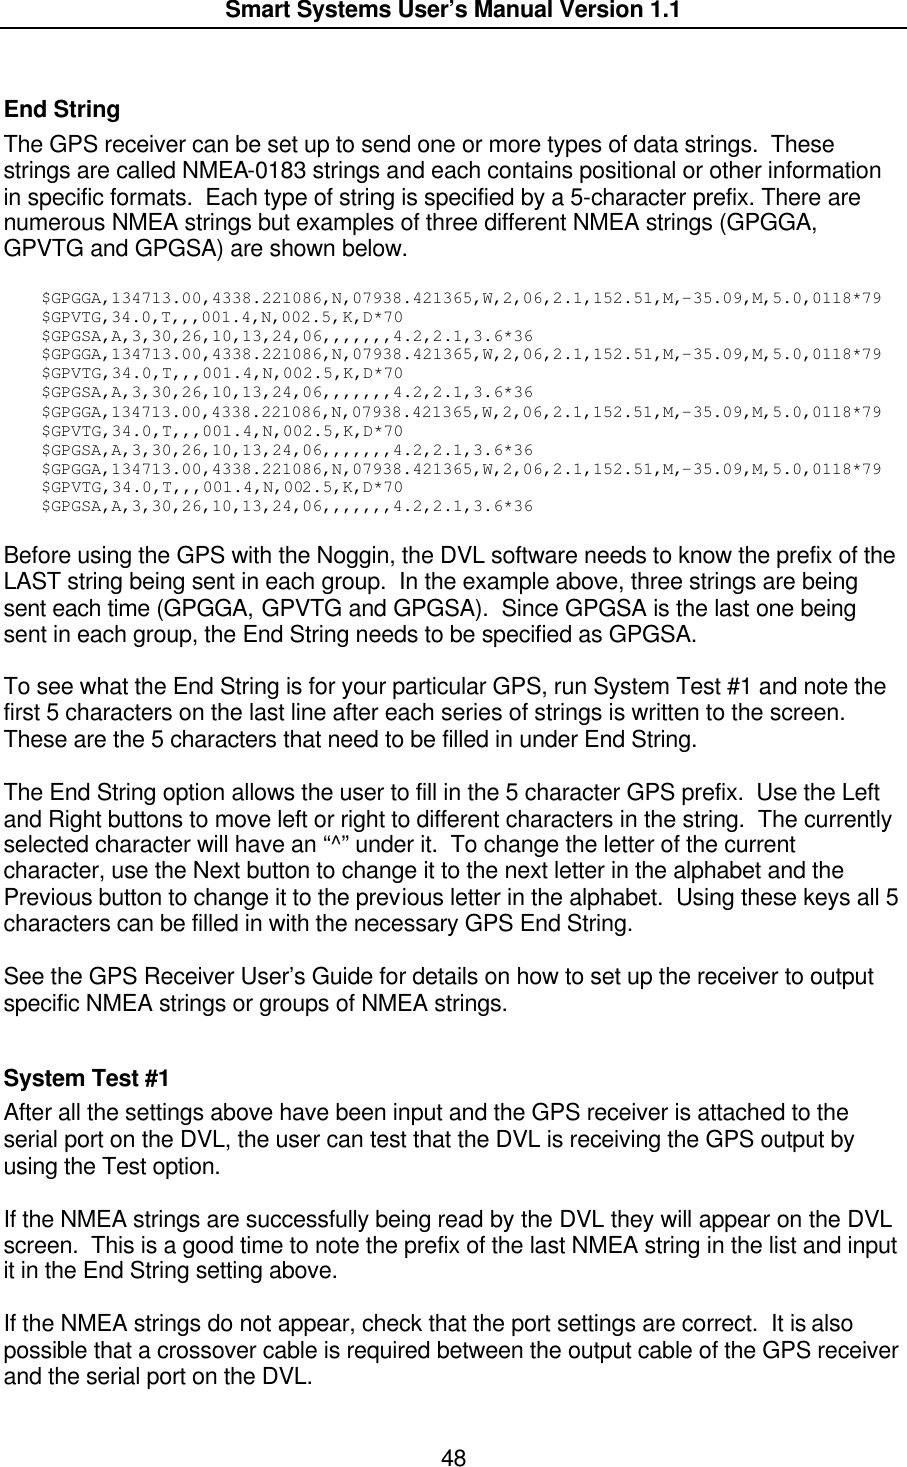  Smart Systems User’s Manual Version 1.1  48  End String The GPS receiver can be set up to send one or more types of data strings.  These strings are called NMEA-0183 strings and each contains positional or other information in specific formats.  Each type of string is specified by a 5-character prefix. There are numerous NMEA strings but examples of three different NMEA strings (GPGGA, GPVTG and GPGSA) are shown below.    $GPGGA,134713.00,4338.221086,N,07938.421365,W,2,06,2.1,152.51,M,-35.09,M,5.0,0118*79 $GPVTG,34.0,T,,,001.4,N,002.5,K,D*70 $GPGSA,A,3,30,26,10,13,24,06,,,,,,,4.2,2.1,3.6*36 $GPGGA,134713.00,4338.221086,N,07938.421365,W,2,06,2.1,152.51,M,-35.09,M,5.0,0118*79 $GPVTG,34.0,T,,,001.4,N,002.5,K,D*70 $GPGSA,A,3,30,26,10,13,24,06,,,,,,,4.2,2.1,3.6*36 $GPGGA,134713.00,4338.221086,N,07938.421365,W,2,06,2.1,152.51,M,-35.09,M,5.0,0118*79 $GPVTG,34.0,T,,,001.4,N,002.5,K,D*70 $GPGSA,A,3,30,26,10,13,24,06,,,,,,,4.2,2.1,3.6*36 $GPGGA,134713.00,4338.221086,N,07938.421365,W,2,06,2.1,152.51,M,-35.09,M,5.0,0118*79 $GPVTG,34.0,T,,,001.4,N,002.5,K,D*70 $GPGSA,A,3,30,26,10,13,24,06,,,,,,,4.2,2.1,3.6*36  Before using the GPS with the Noggin, the DVL software needs to know the prefix of the LAST string being sent in each group.  In the example above, three strings are being sent each time (GPGGA, GPVTG and GPGSA).  Since GPGSA is the last one being sent in each group, the End String needs to be specified as GPGSA.  To see what the End String is for your particular GPS, run System Test #1 and note the first 5 characters on the last line after each series of strings is written to the screen.  These are the 5 characters that need to be filled in under End String.  The End String option allows the user to fill in the 5 character GPS prefix.  Use the Left and Right buttons to move left or right to different characters in the string.  The currently selected character will have an “^” under it.  To change the letter of the current character, use the Next button to change it to the next letter in the alphabet and the Previous button to change it to the previous letter in the alphabet.  Using these keys all 5 characters can be filled in with the necessary GPS End String.  See the GPS Receiver User’s Guide for details on how to set up the receiver to output specific NMEA strings or groups of NMEA strings.    System Test #1 After all the settings above have been input and the GPS receiver is attached to the serial port on the DVL, the user can test that the DVL is receiving the GPS output by using the Test option.   If the NMEA strings are successfully being read by the DVL they will appear on the DVL screen.  This is a good time to note the prefix of the last NMEA string in the list and input it in the End String setting above.  If the NMEA strings do not appear, check that the port settings are correct.  It is also possible that a crossover cable is required between the output cable of the GPS receiver and the serial port on the DVL. 